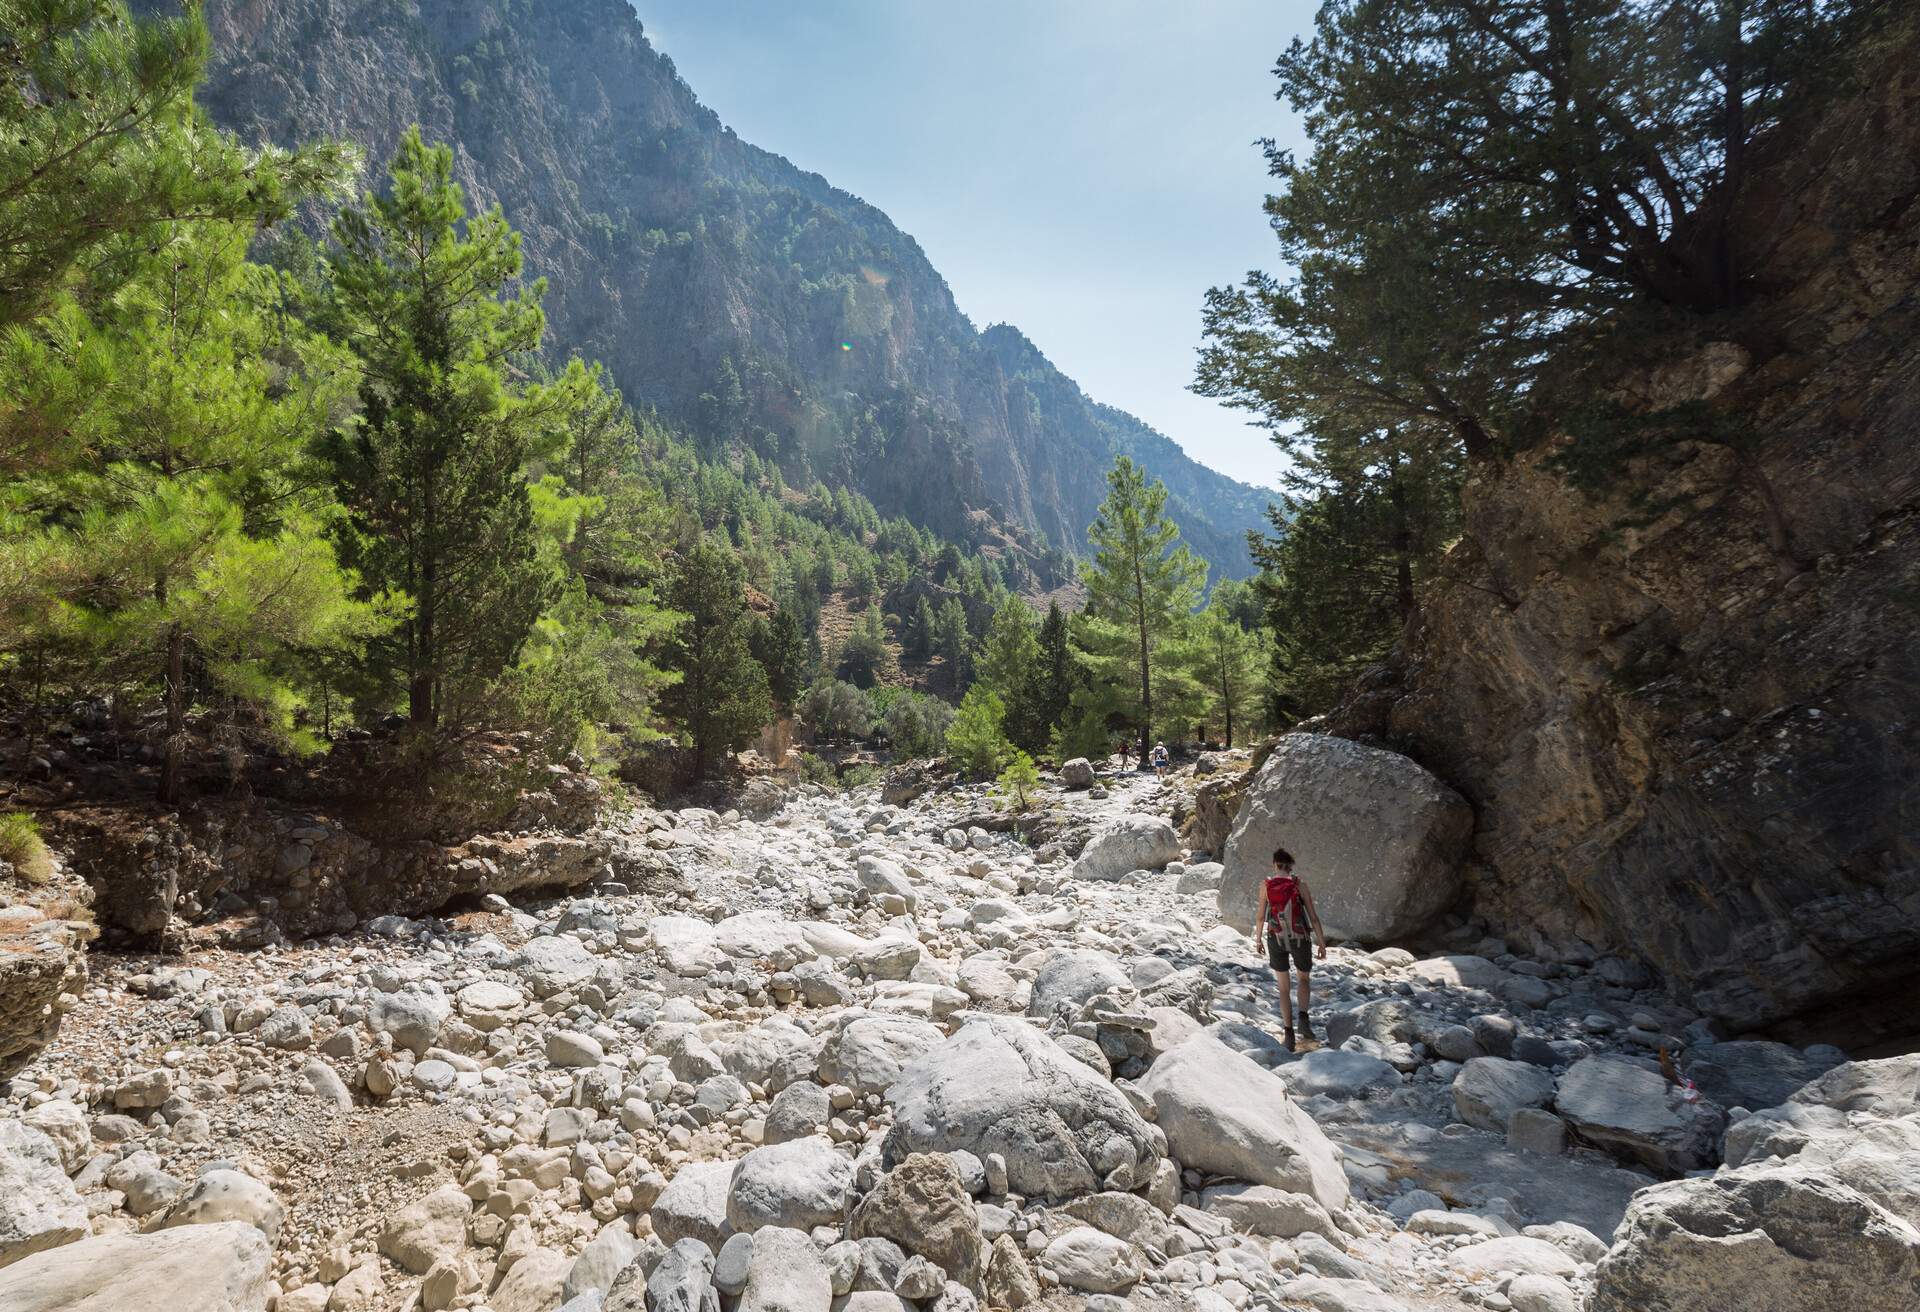 A woman on her way through the Samaria Gorge, Crete. The gorge is in southwest Crete in the regional unit of Chania and a major tourist attraction of the island  . It was created by a small river running between the White Mountains and Mt. Volakias. The gorge is 16 km long, starting at an altitude of 1,250 m (4100 ft.)at the northern entrance, and ending at the shores of the Libyan Sea in Agia Roumeli.